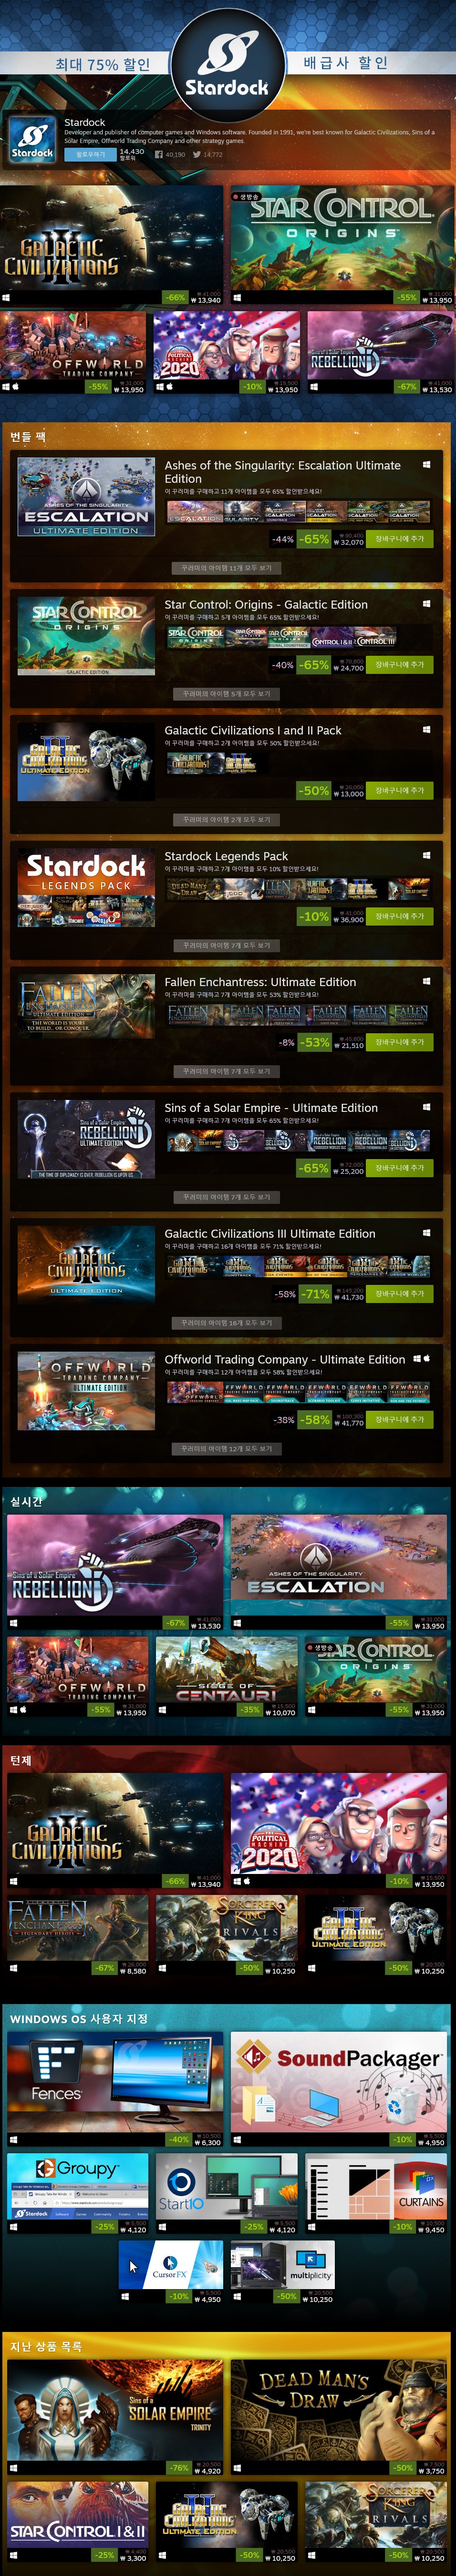 Screenshot_2020-09-23 Save up to 75% during the Stardock Publisher Sale.jpg